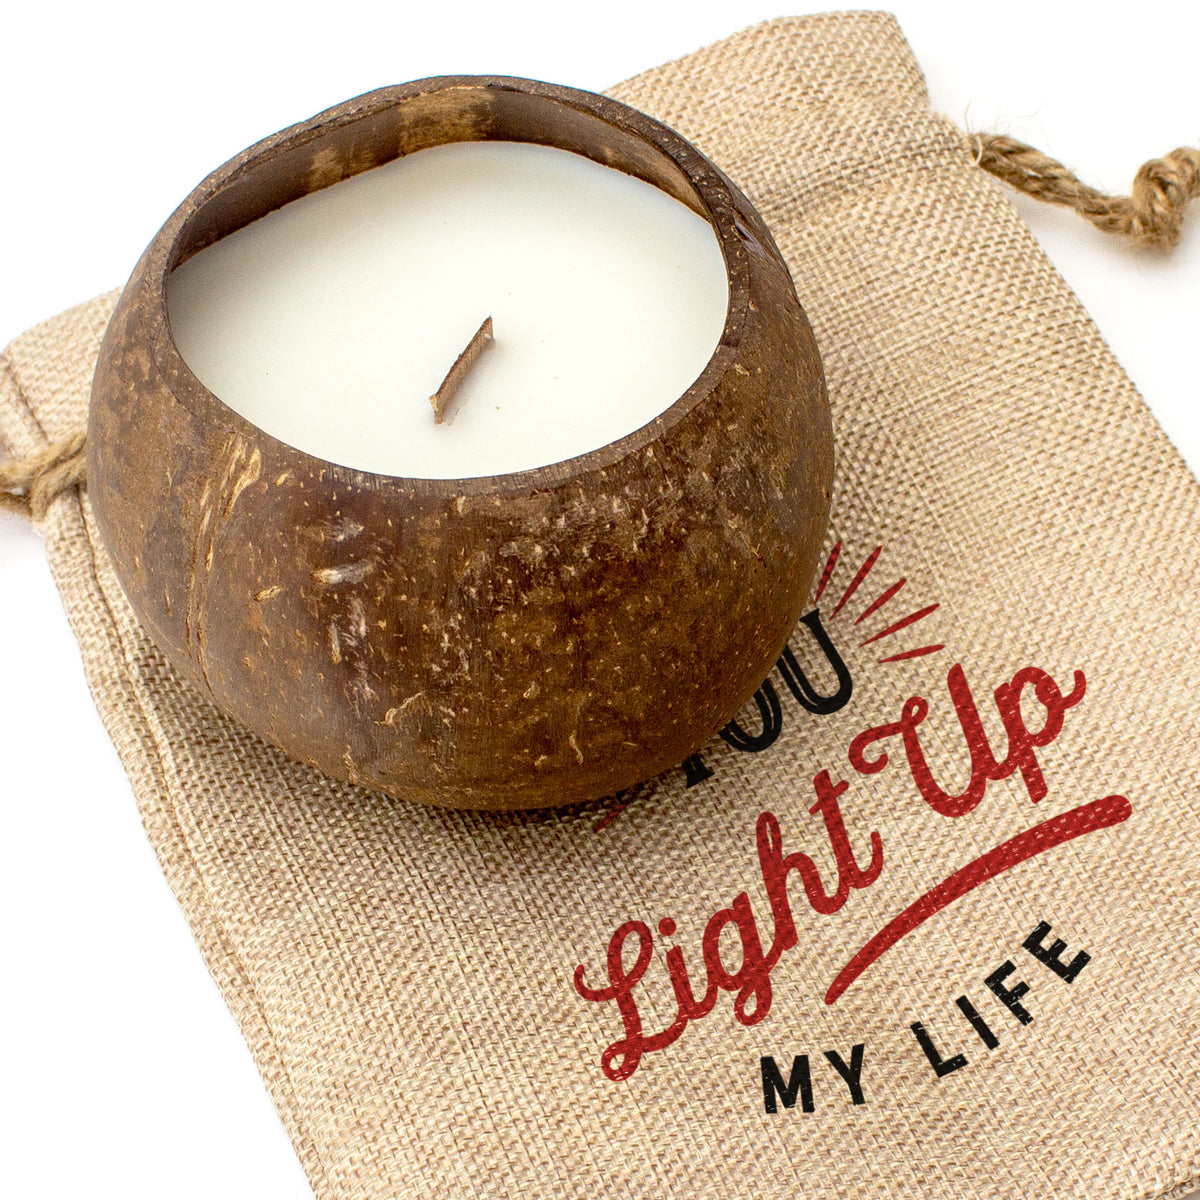 YOU LIGHT UP MY LIFE - Toasted Coconut Bowl Candle – Soy Wax - Gift Present